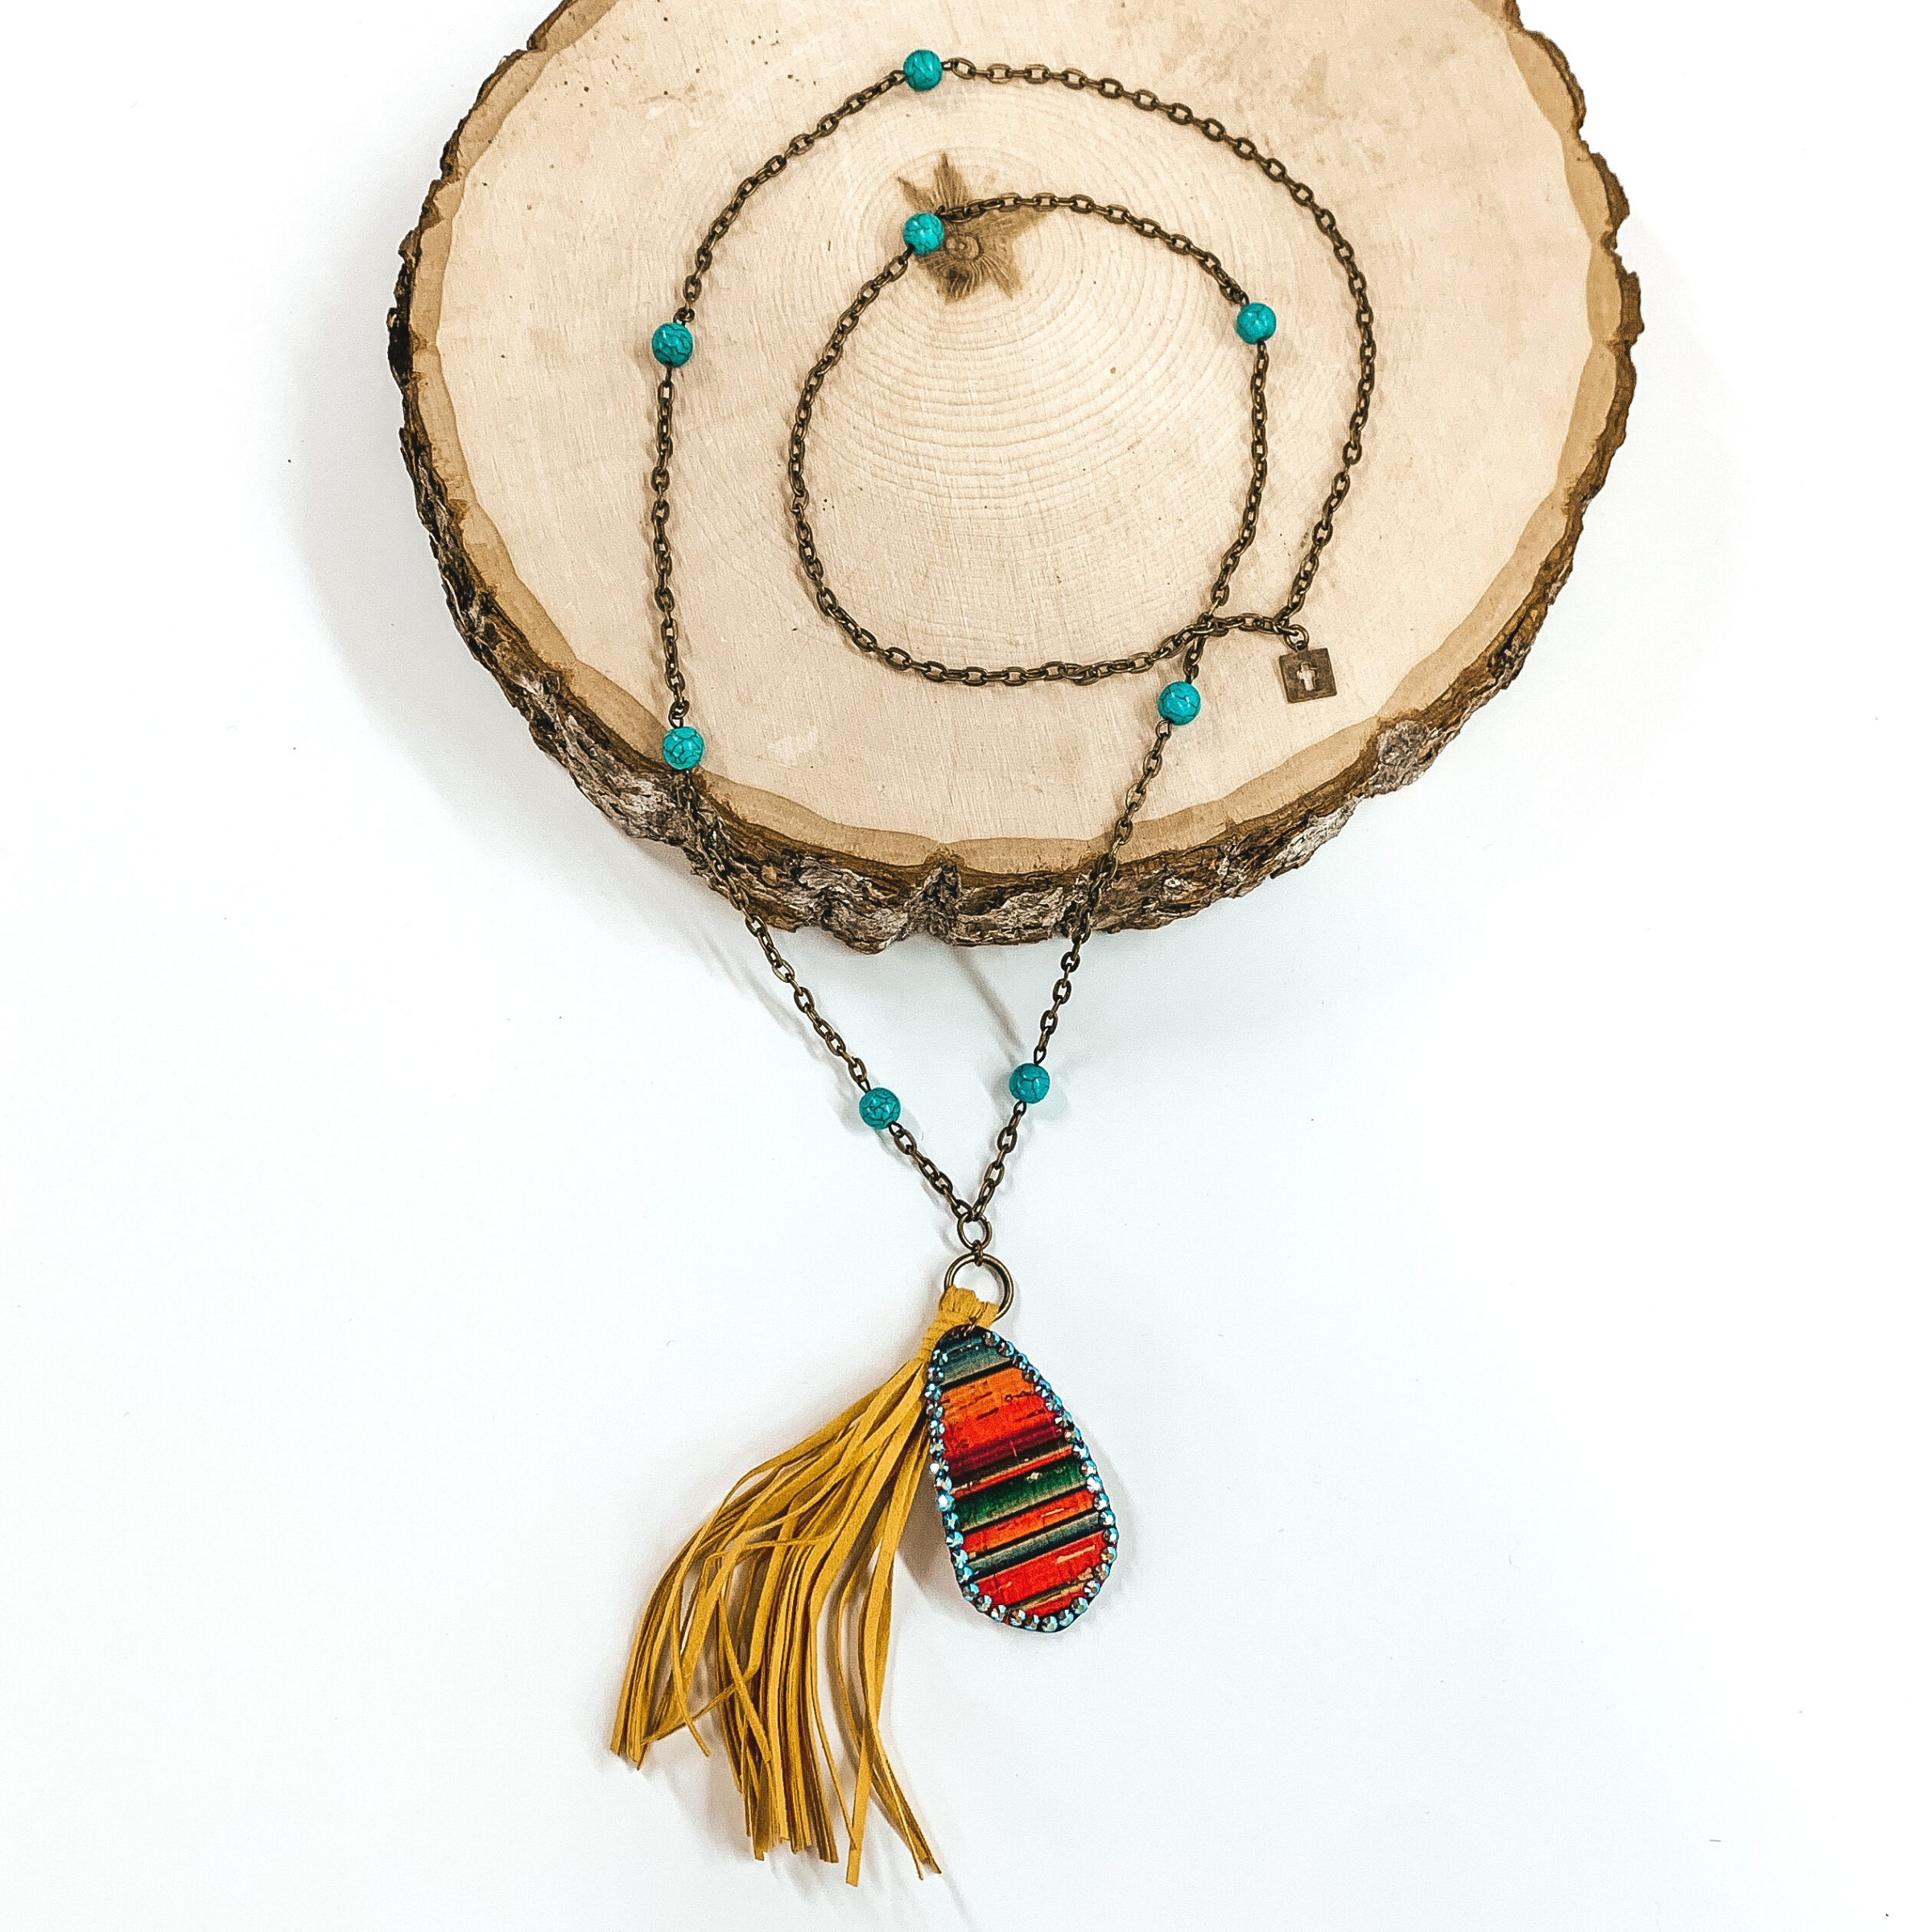 Pink Panache | Long Bronze Chained Necklace with Yellow Tassels and Serape Charm - Giddy Up Glamour Boutique